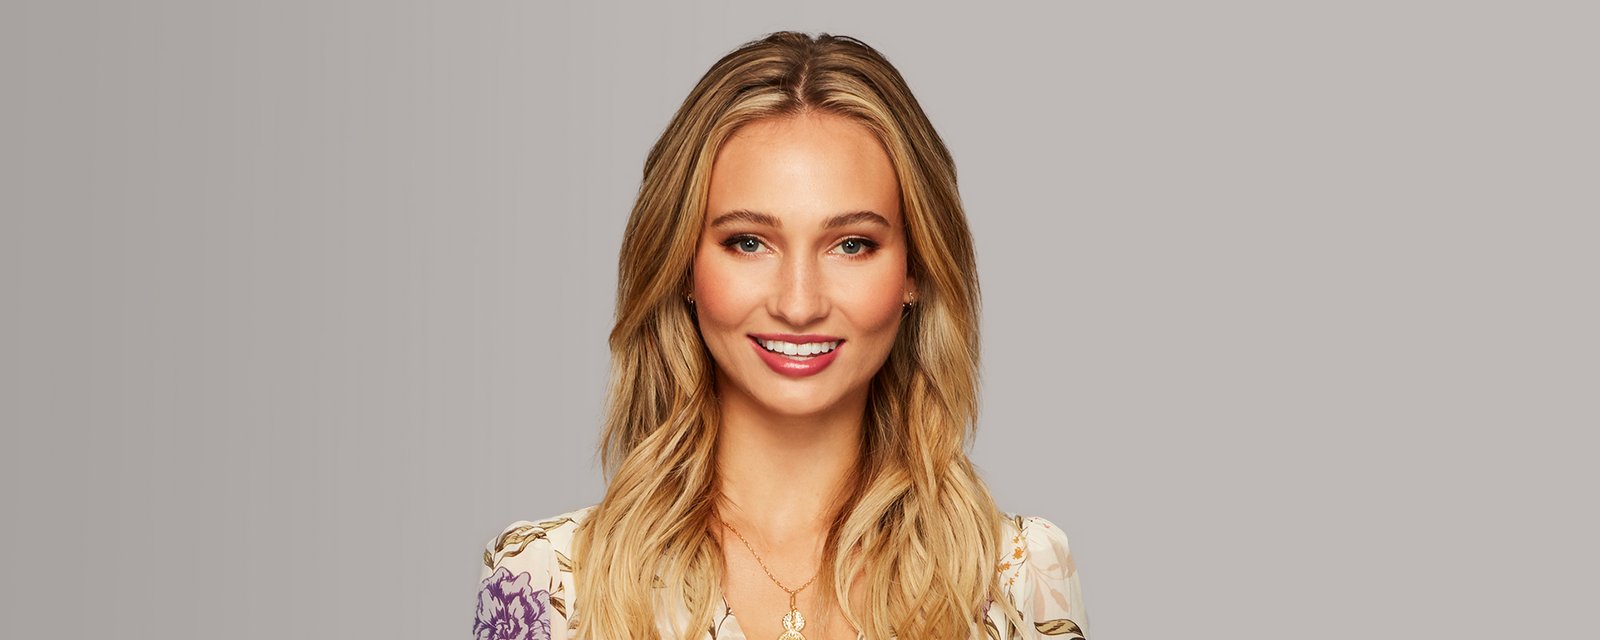 1548972804 76 this new bachelor contestant faking an australian accent is either crazy or crazy like a fox texts from last night - This New ‘Bachelor’ Contestant Faking An Australian Accent Is Either Crazy Or Crazy Like A Fox – Texts From Last Night